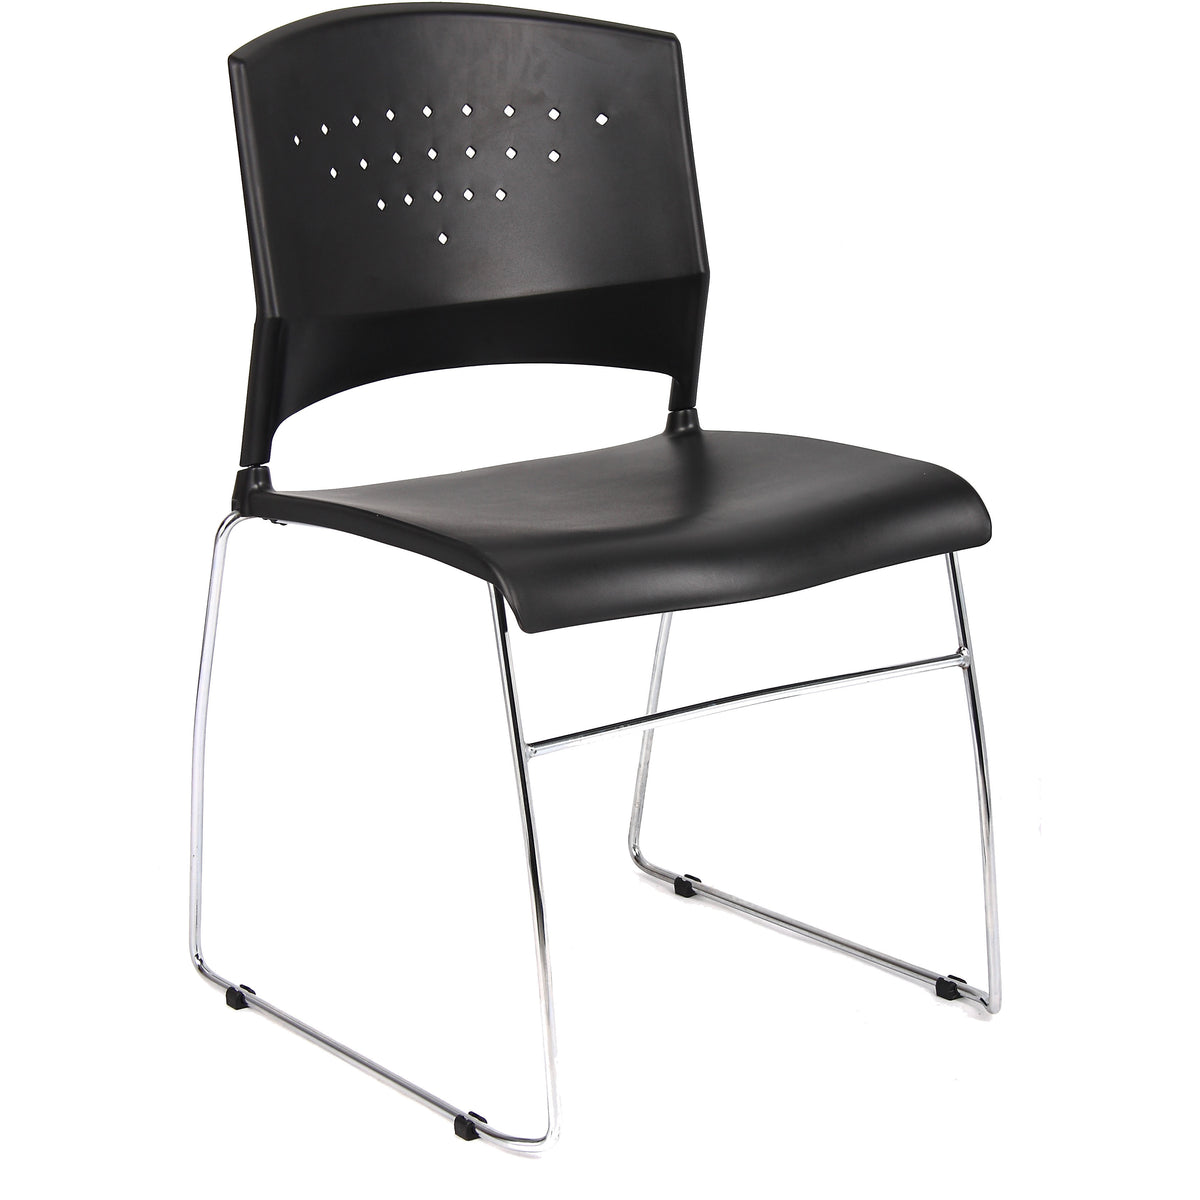 Black Stack Chair With Chrome Frame (Pack of 5), B1400-BK-5